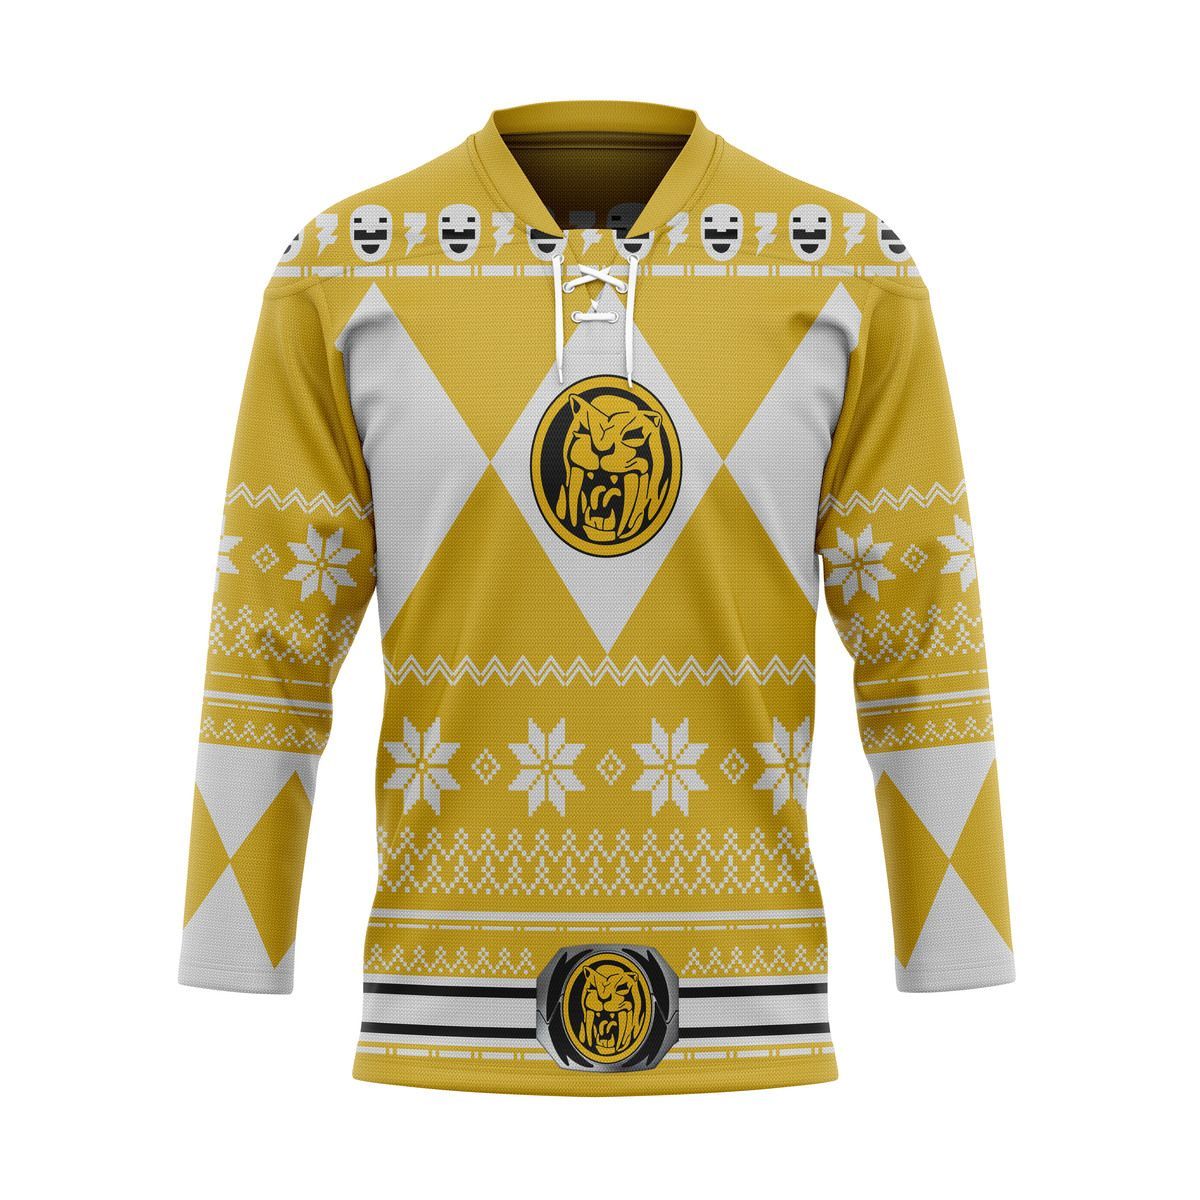 The style of a hockey jersey should match your personality. 146